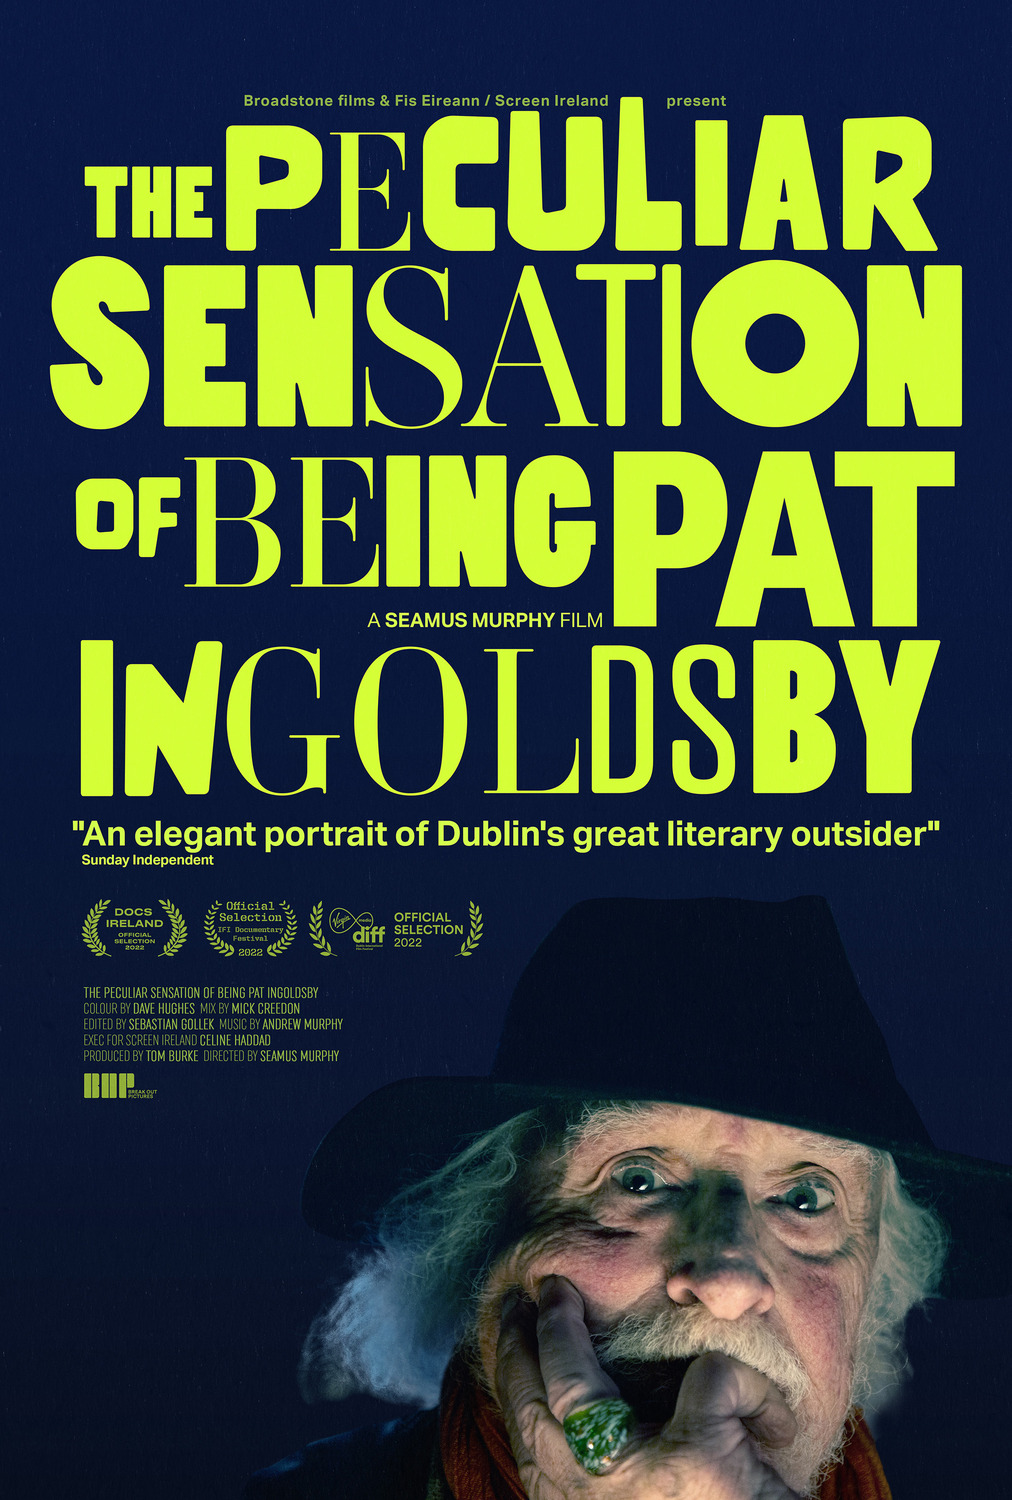 Extra Large Movie Poster Image for The Peculiar Sensation of Being Pat Ingoldsby 